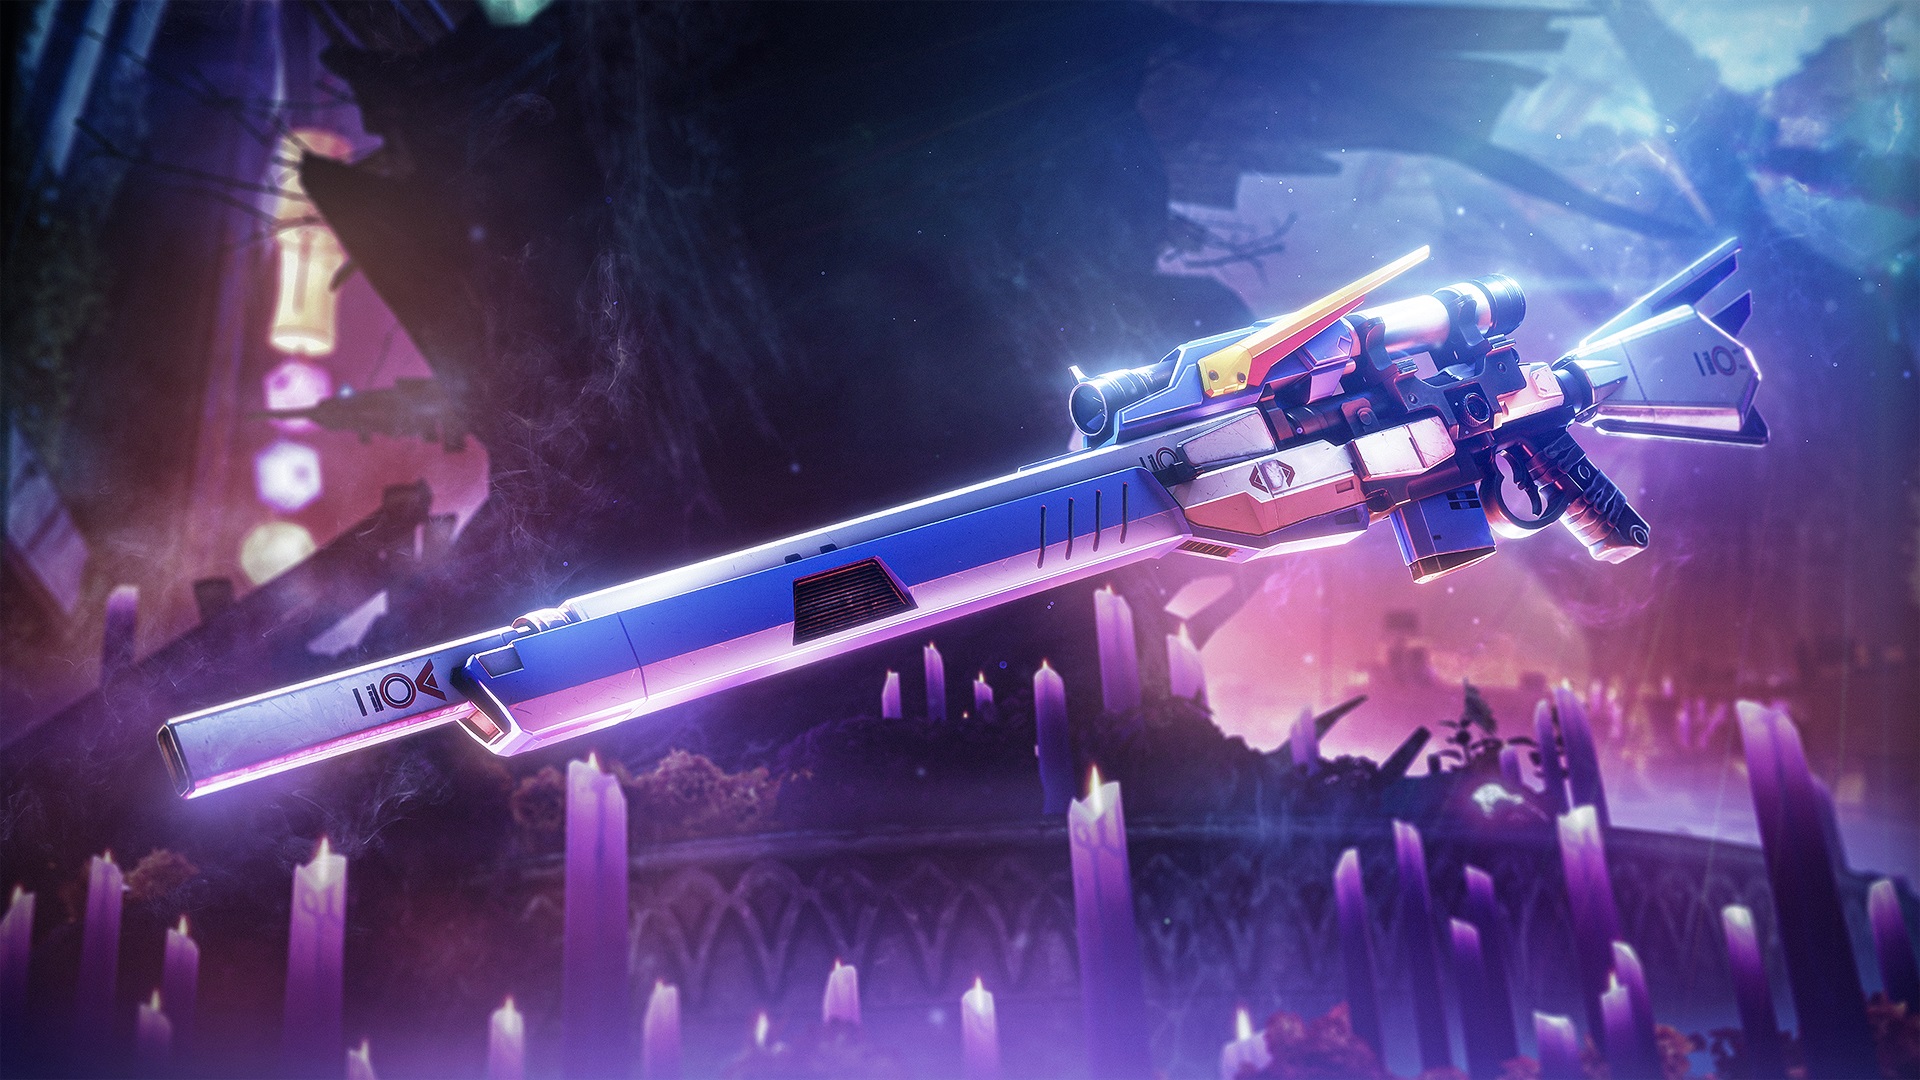 The fantastic sound of Destiny’s new anime sniper rifle was years in the making